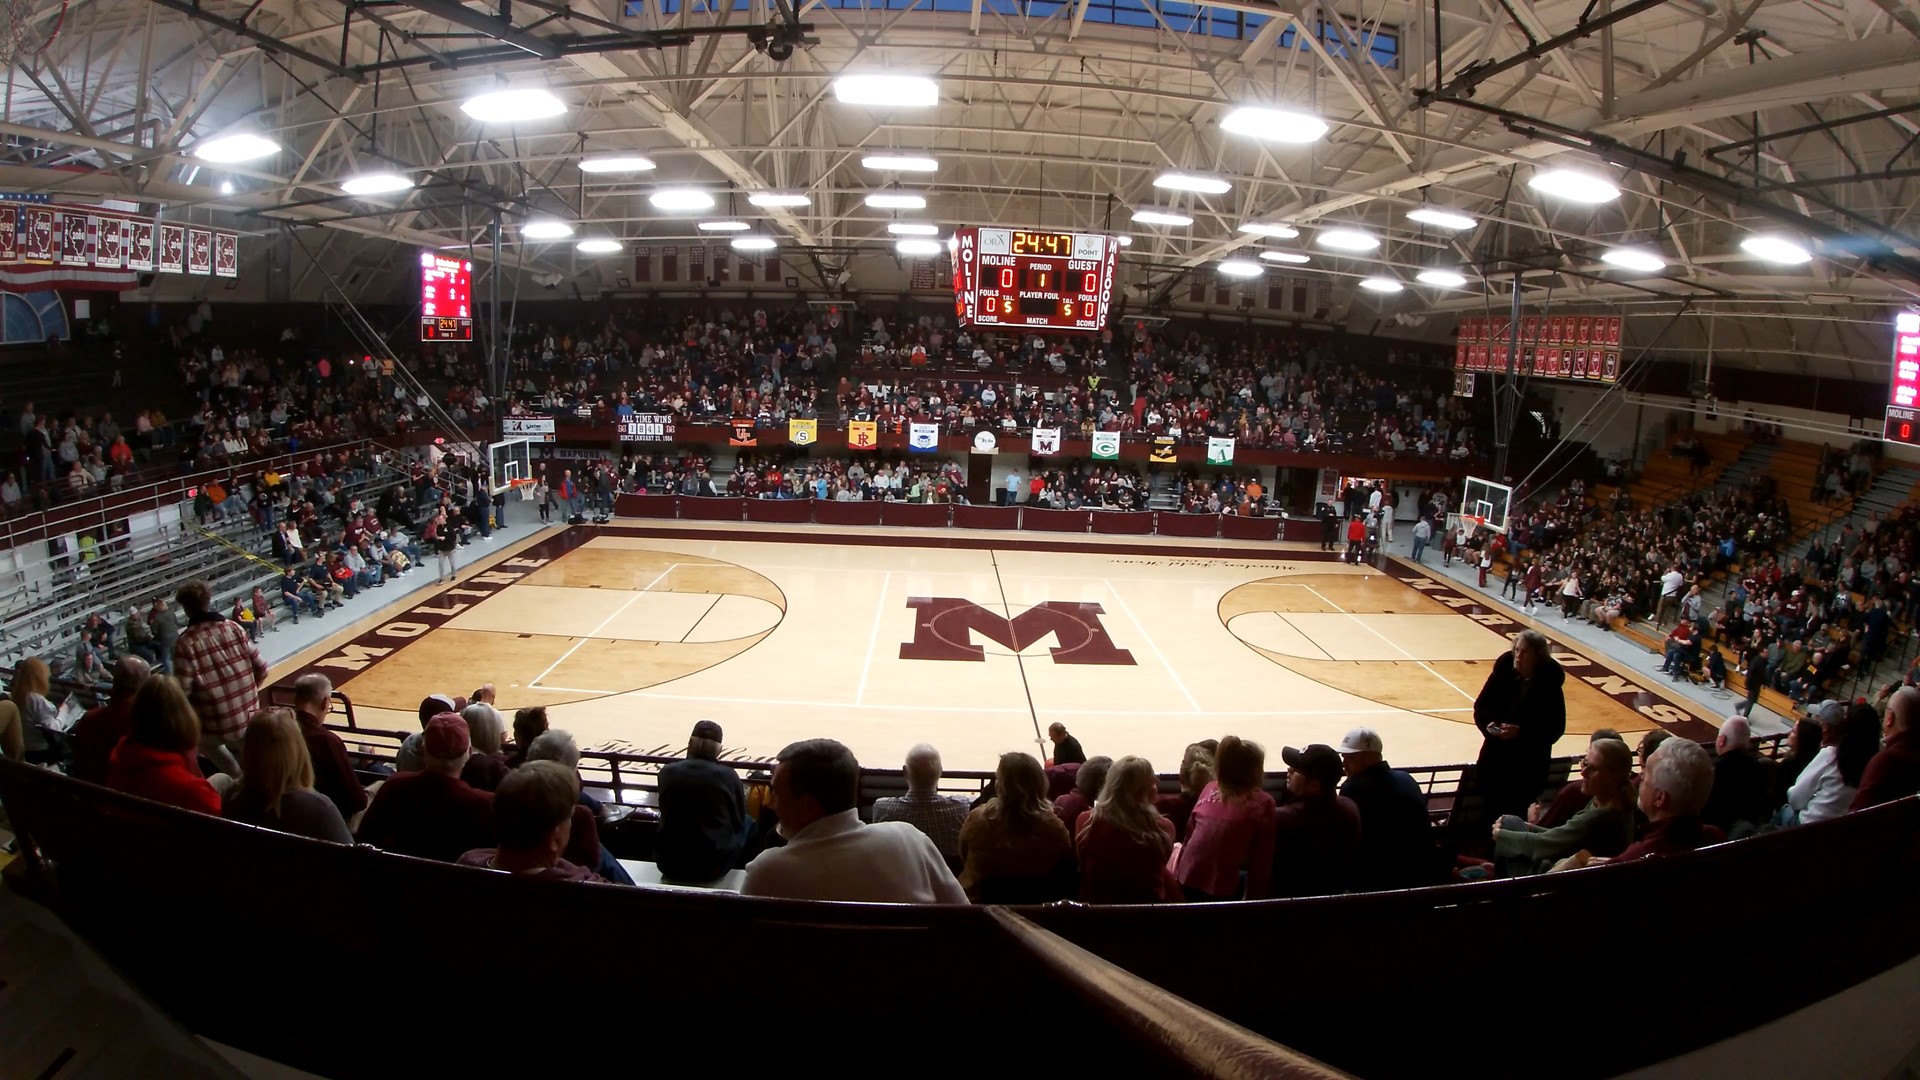 It's been a record winning season for the Maroons, with the boy's basketball team standing at 32-3.